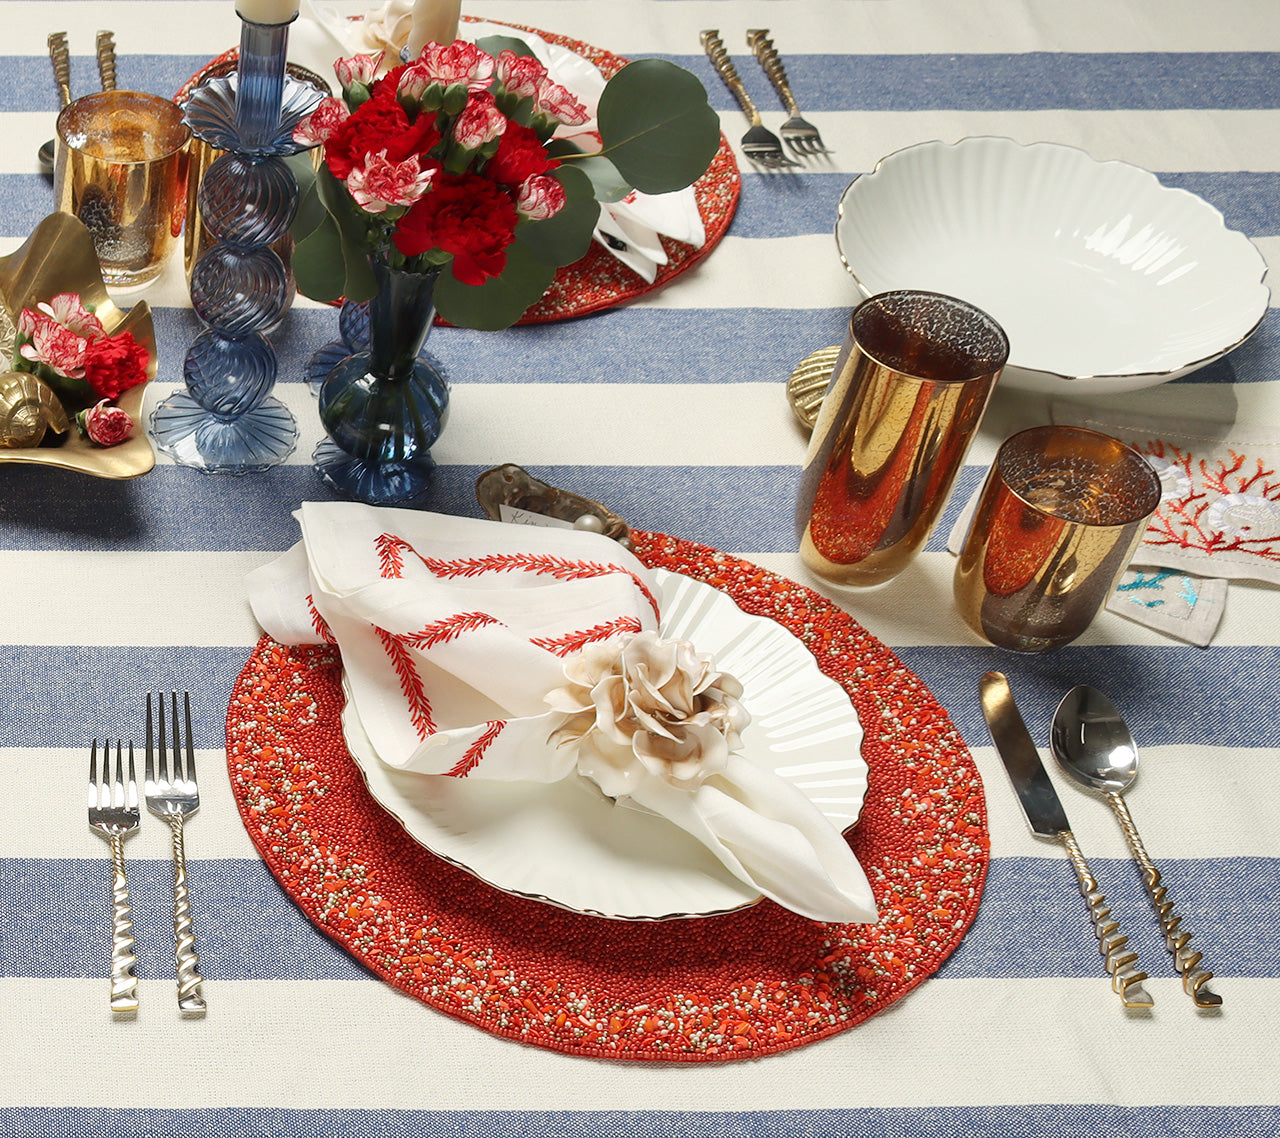 Table with a blue-striped tablecloth red placemat and two blue, glass Tess Bud Vases